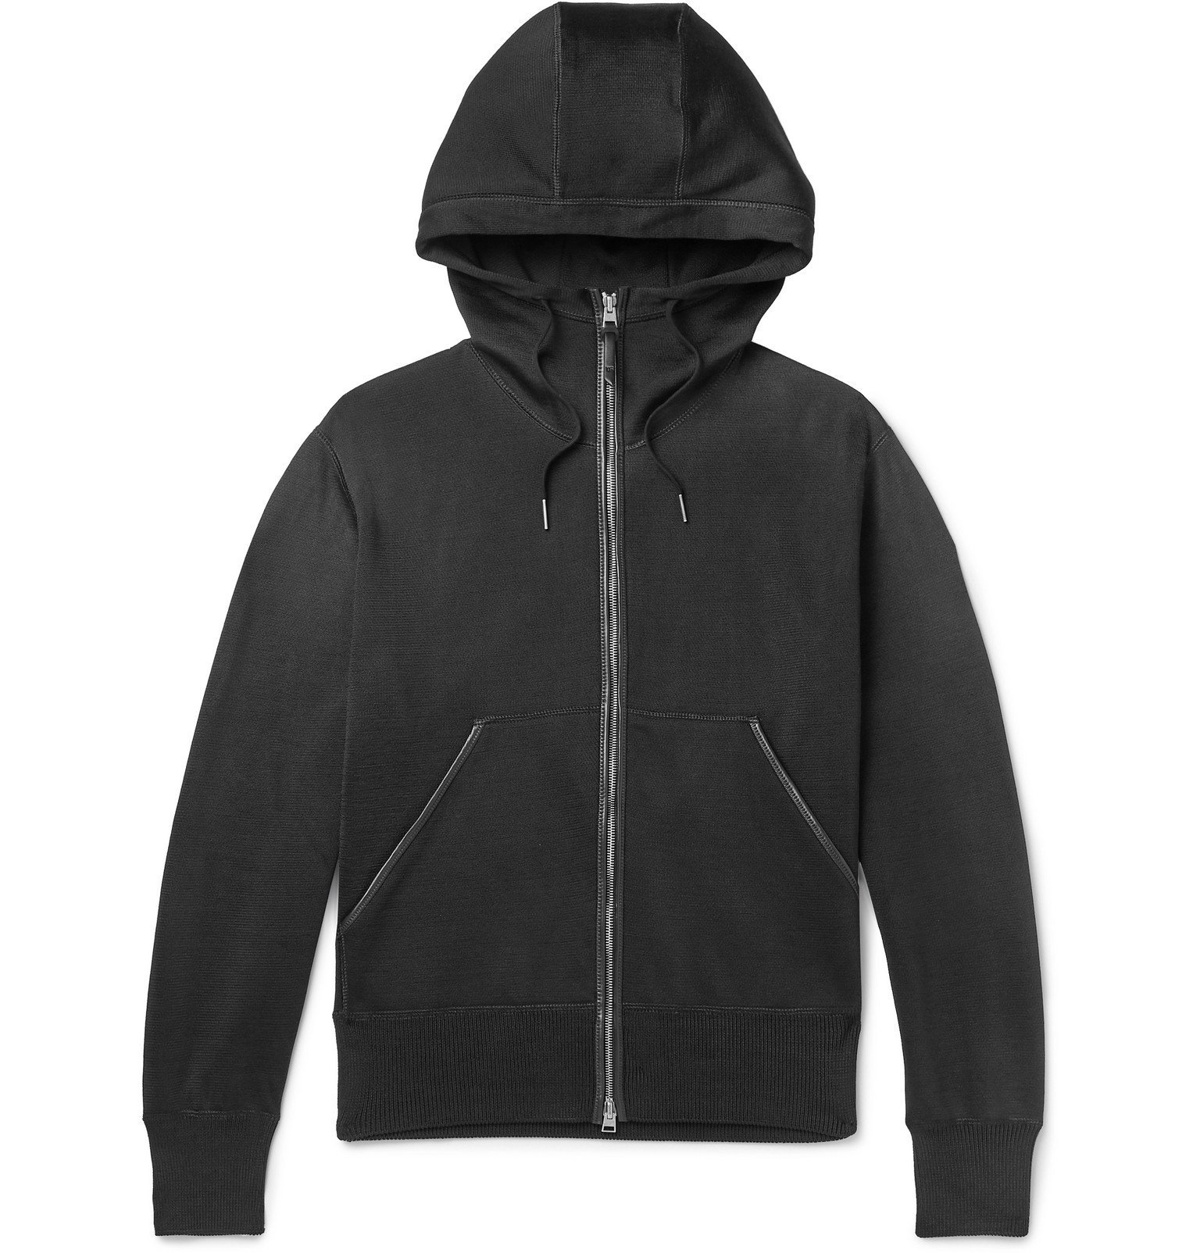 TOM FORD - Leather-Trimmed Jersey Zip-Up Hoodie - Black TOM FORD